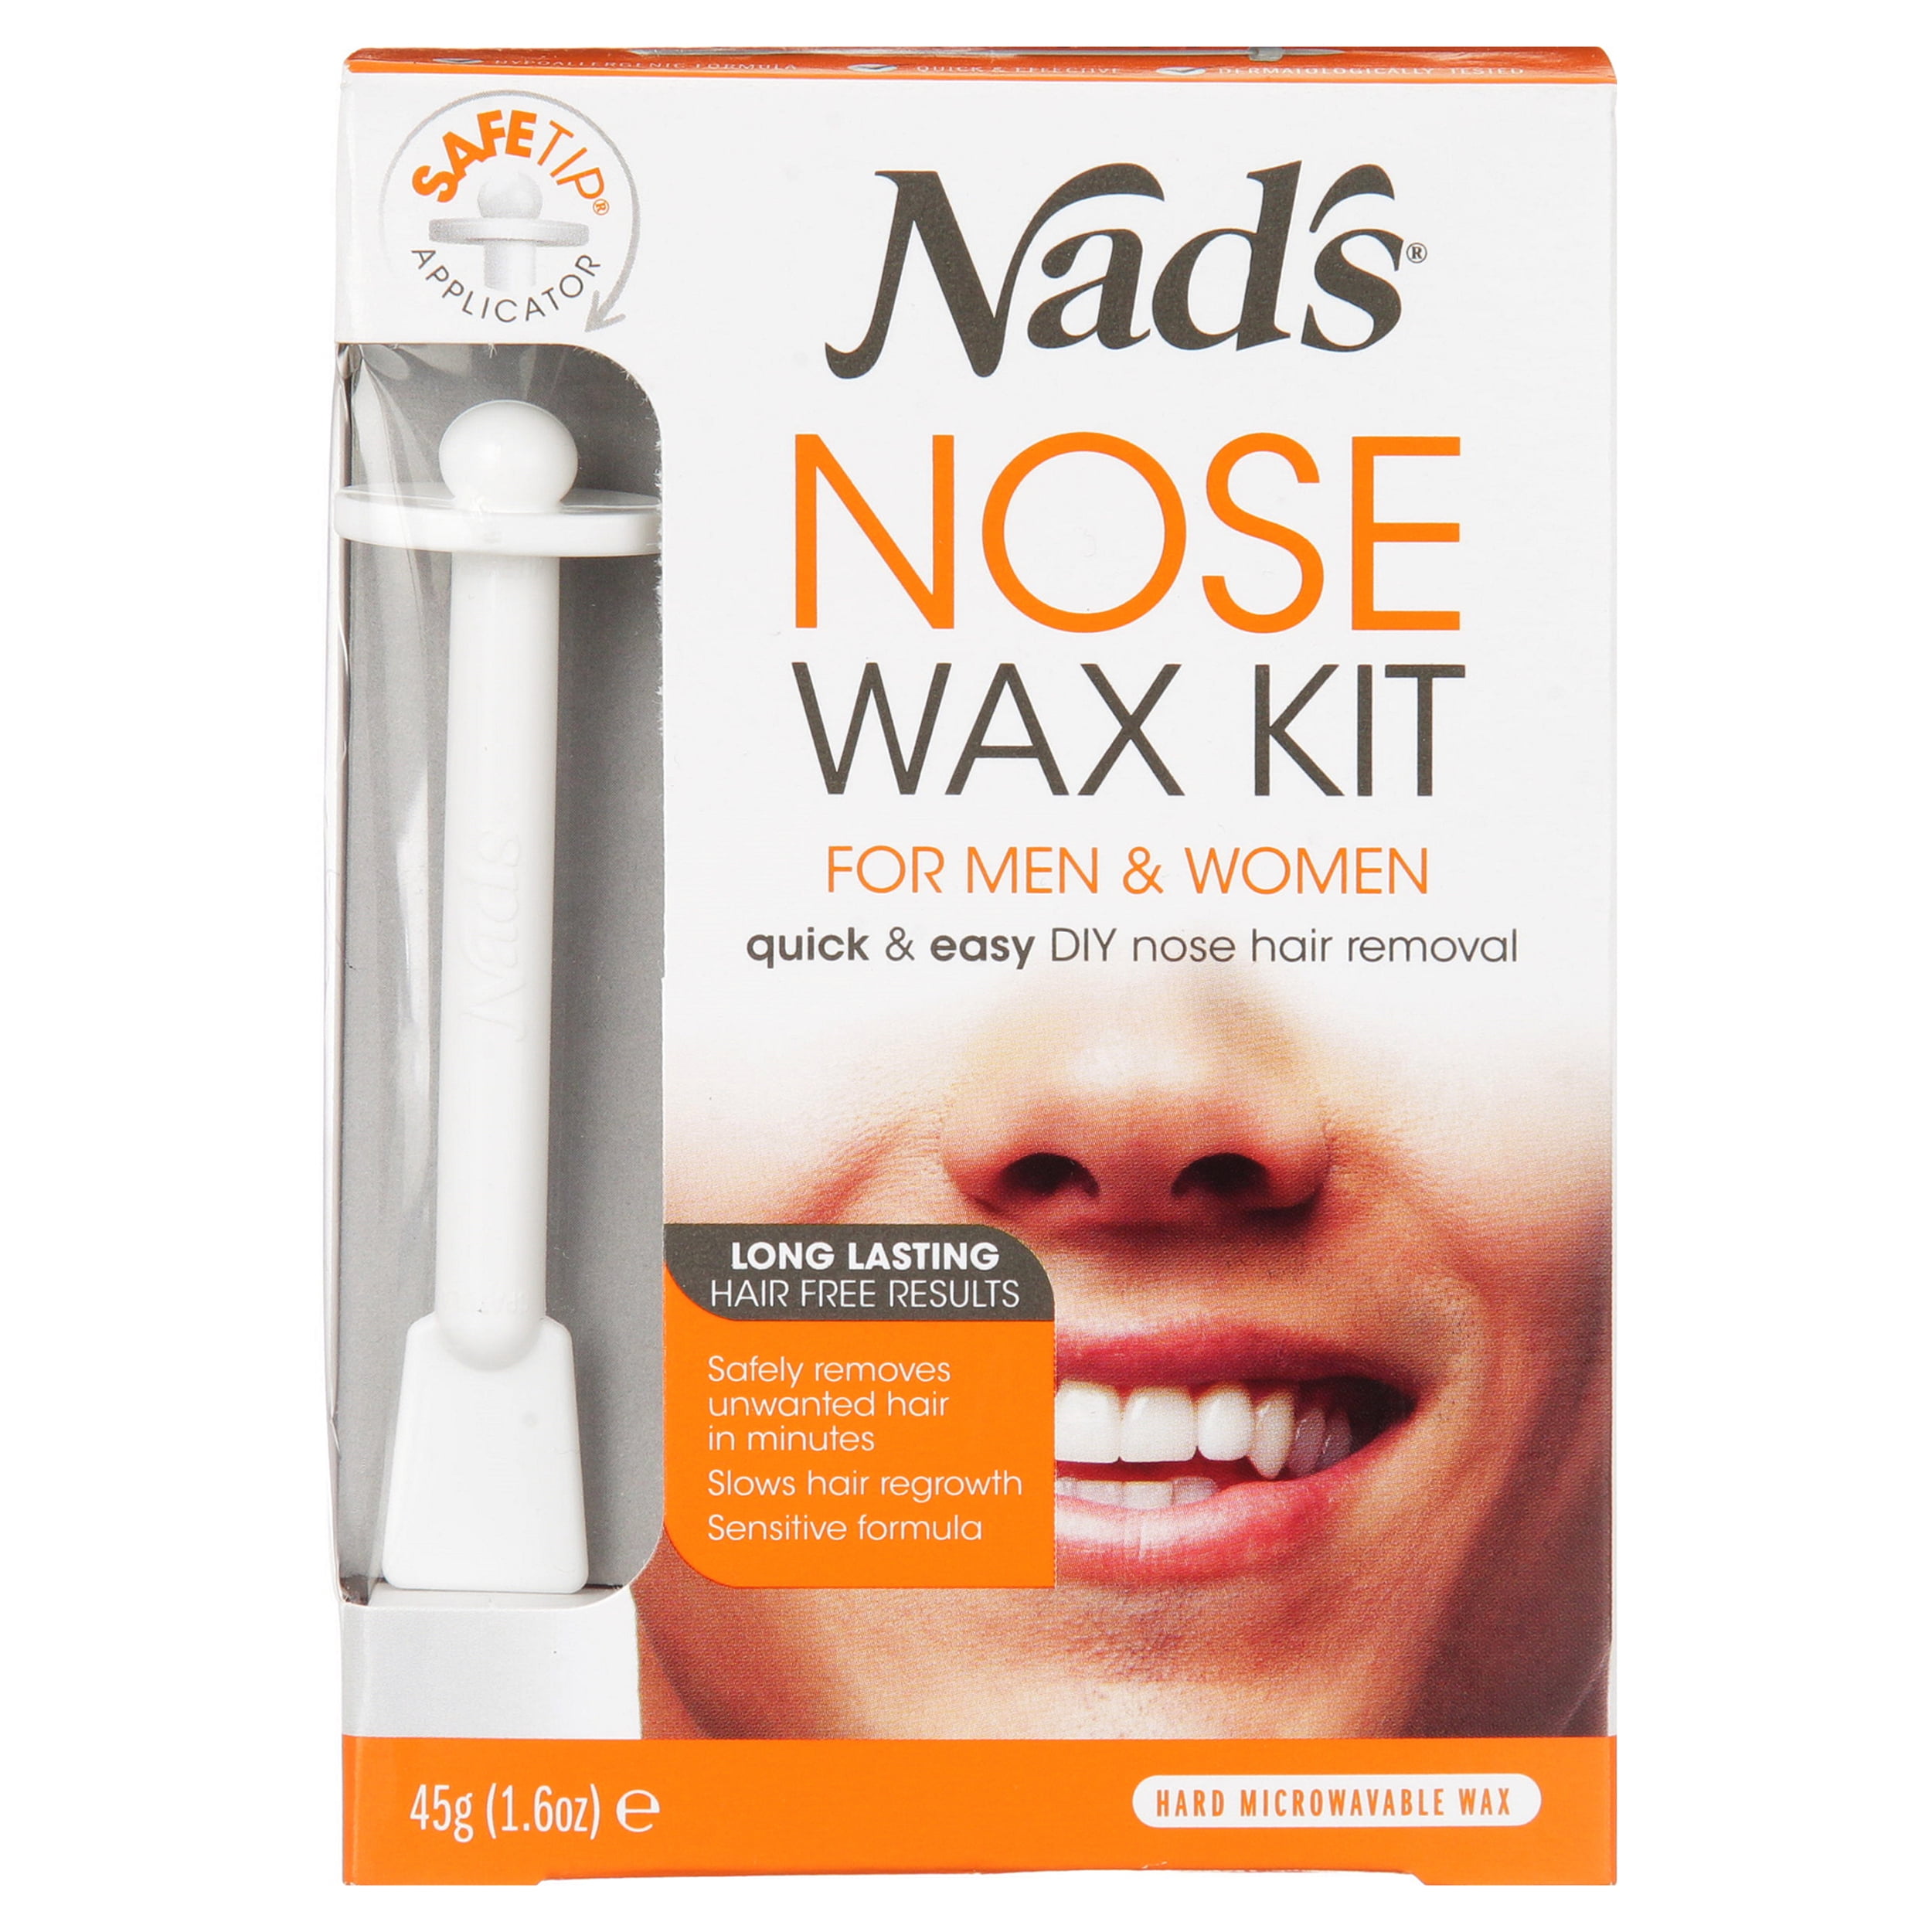 nads nose wax kit